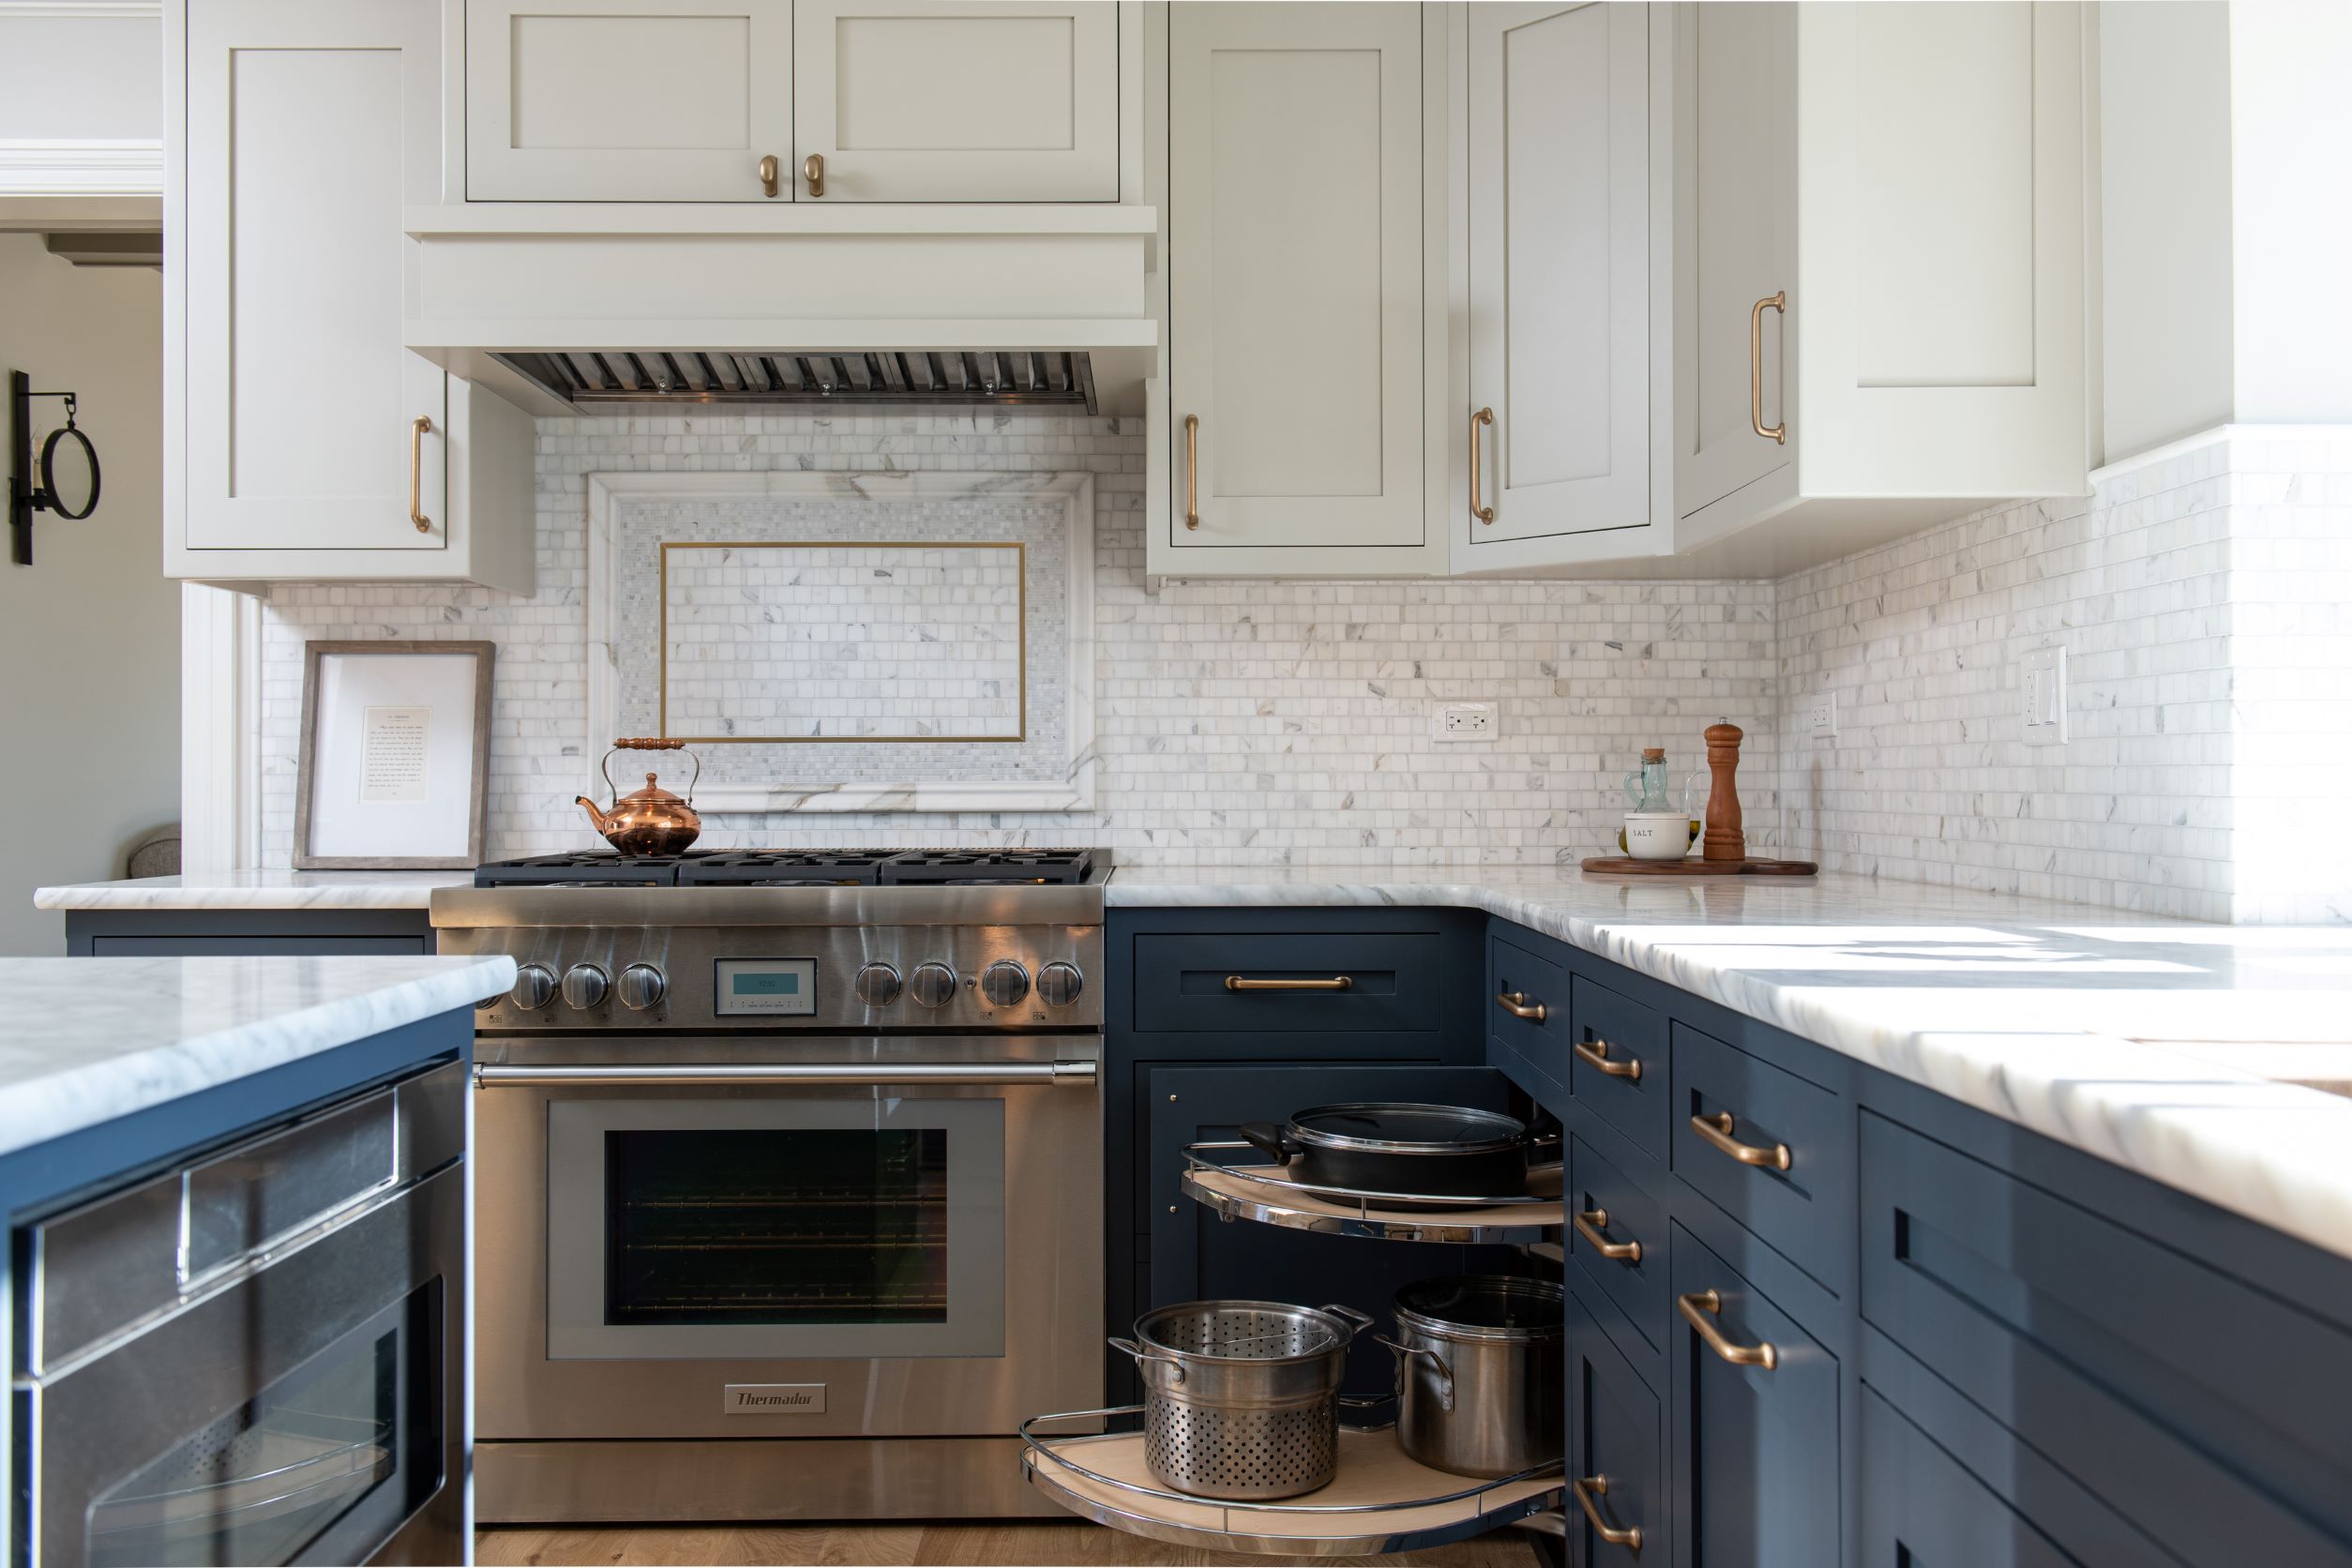 2023 Kitchen Remodel Ideas - Trends to Know for your Chicago Home